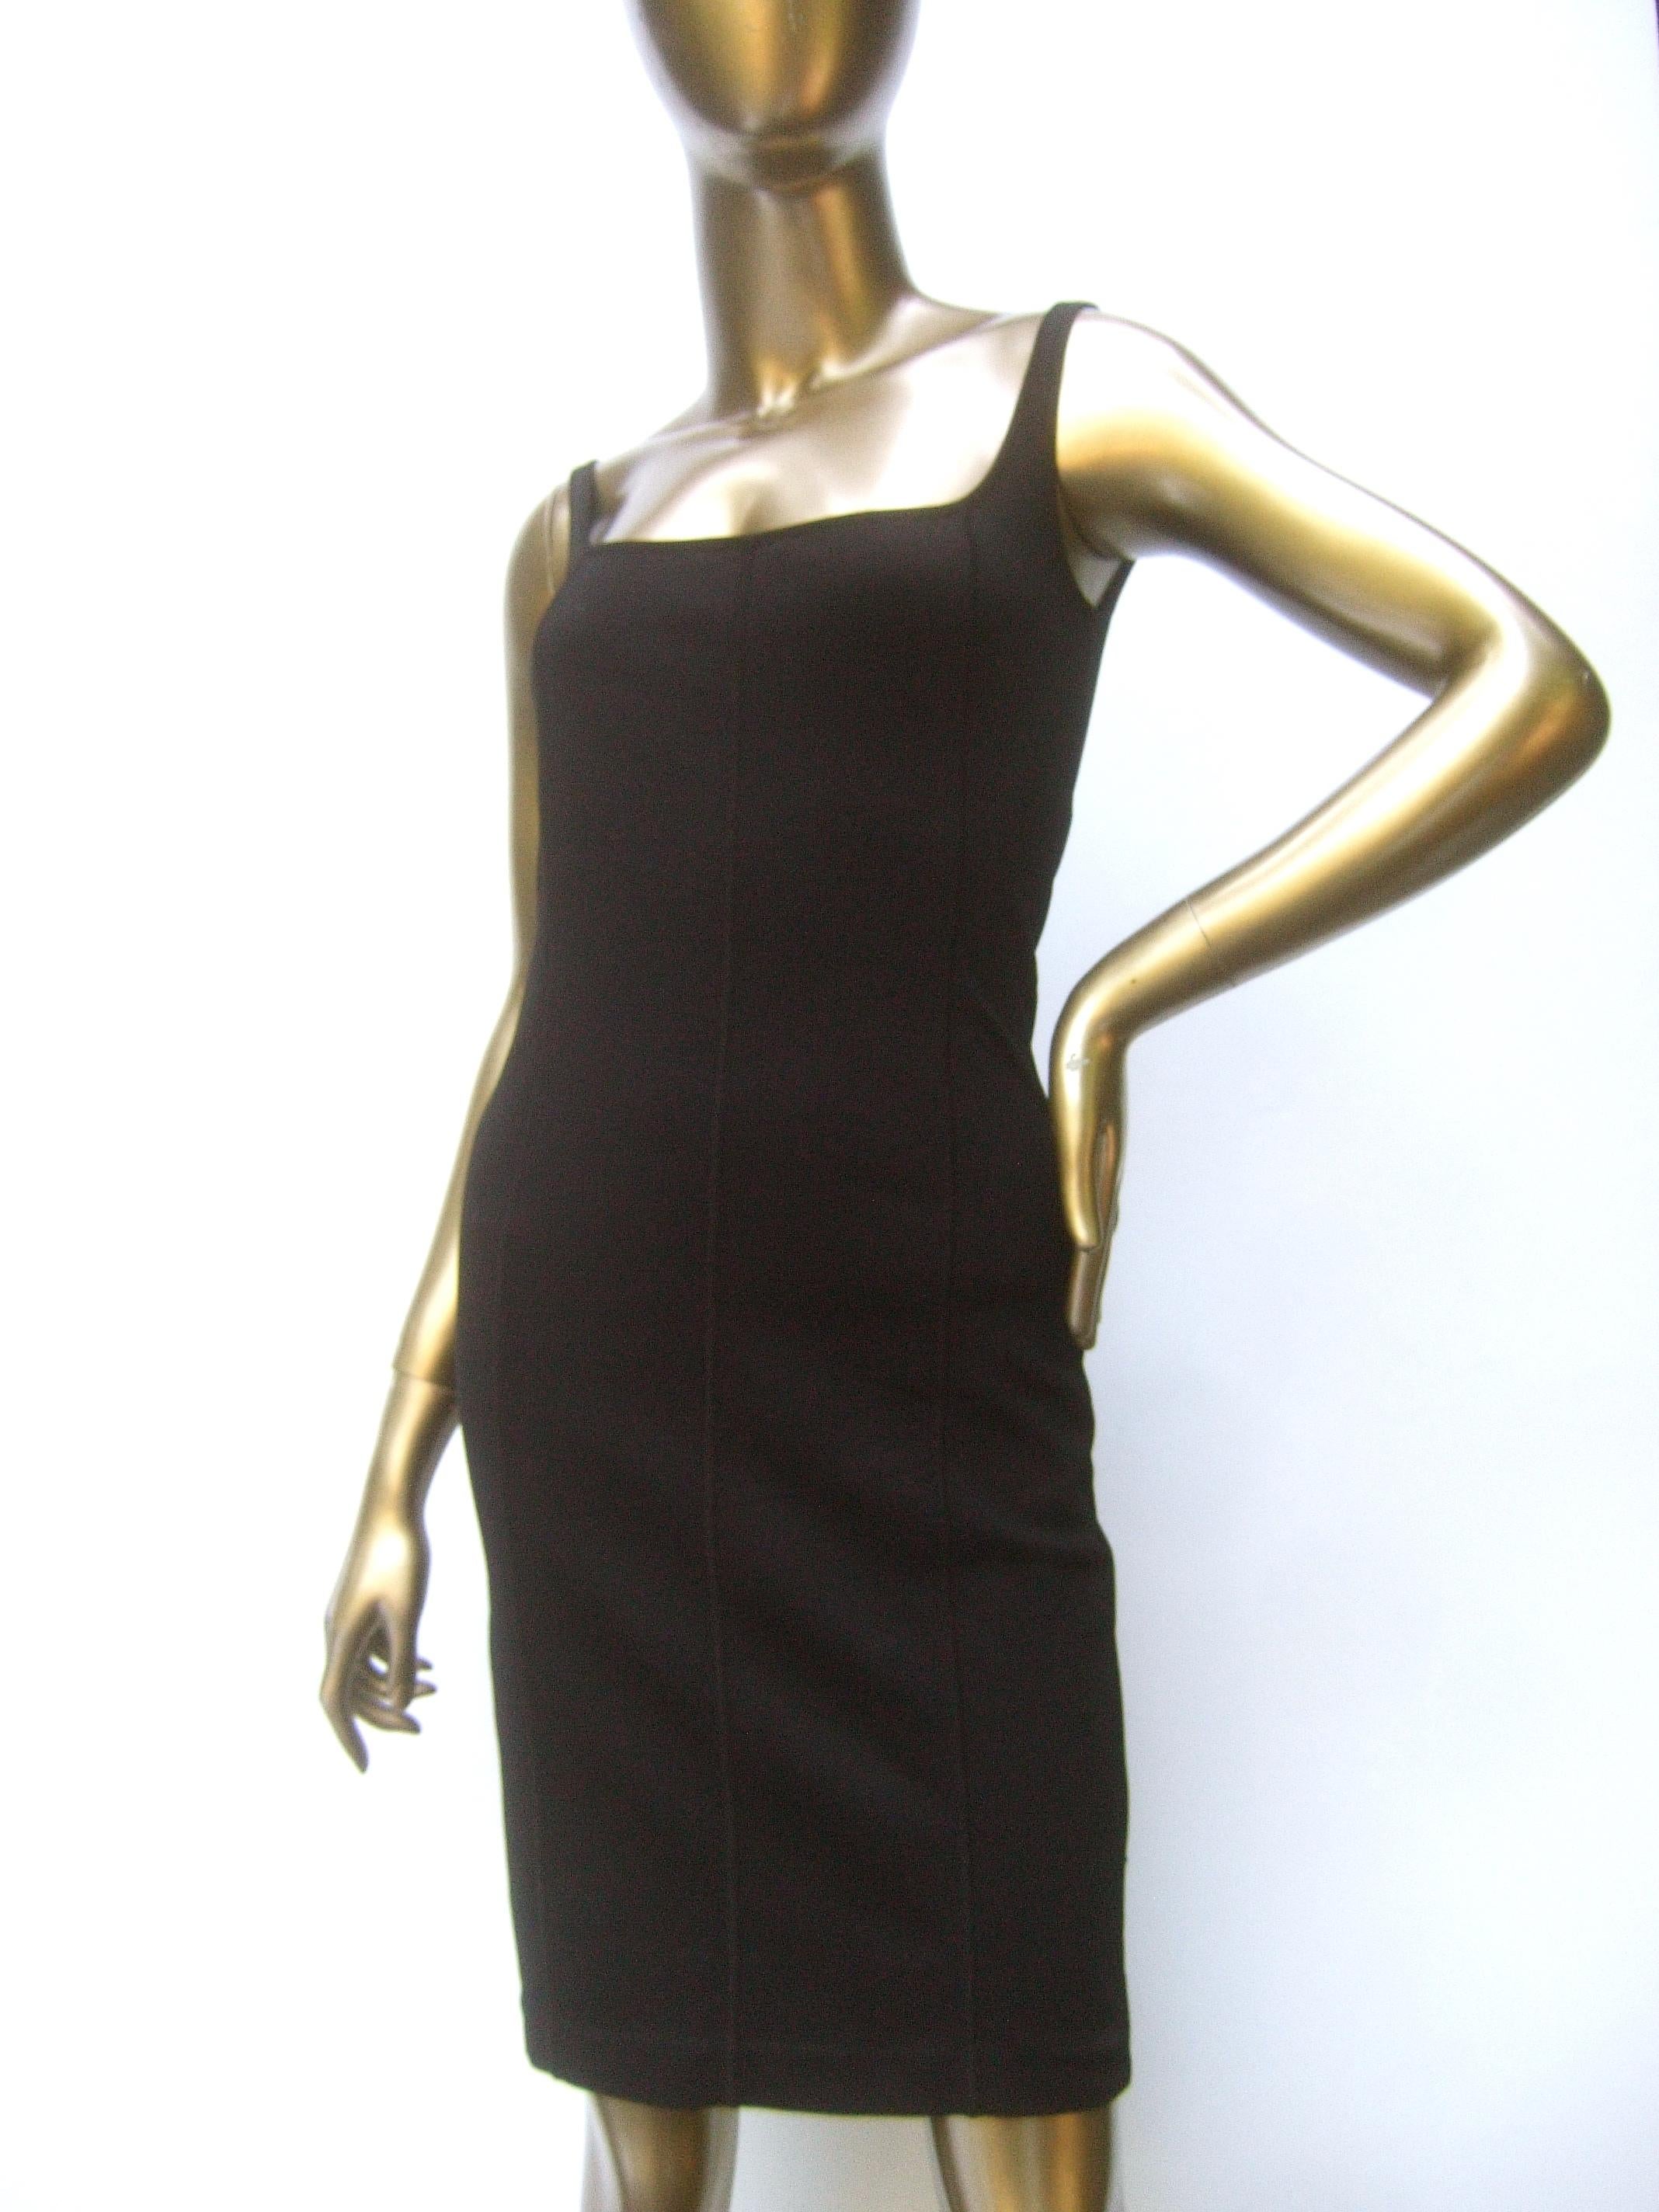 Women's Gucci Italy Chic Black Stretch Knit Tank Dress Tom Ford Era c 1990s For Sale